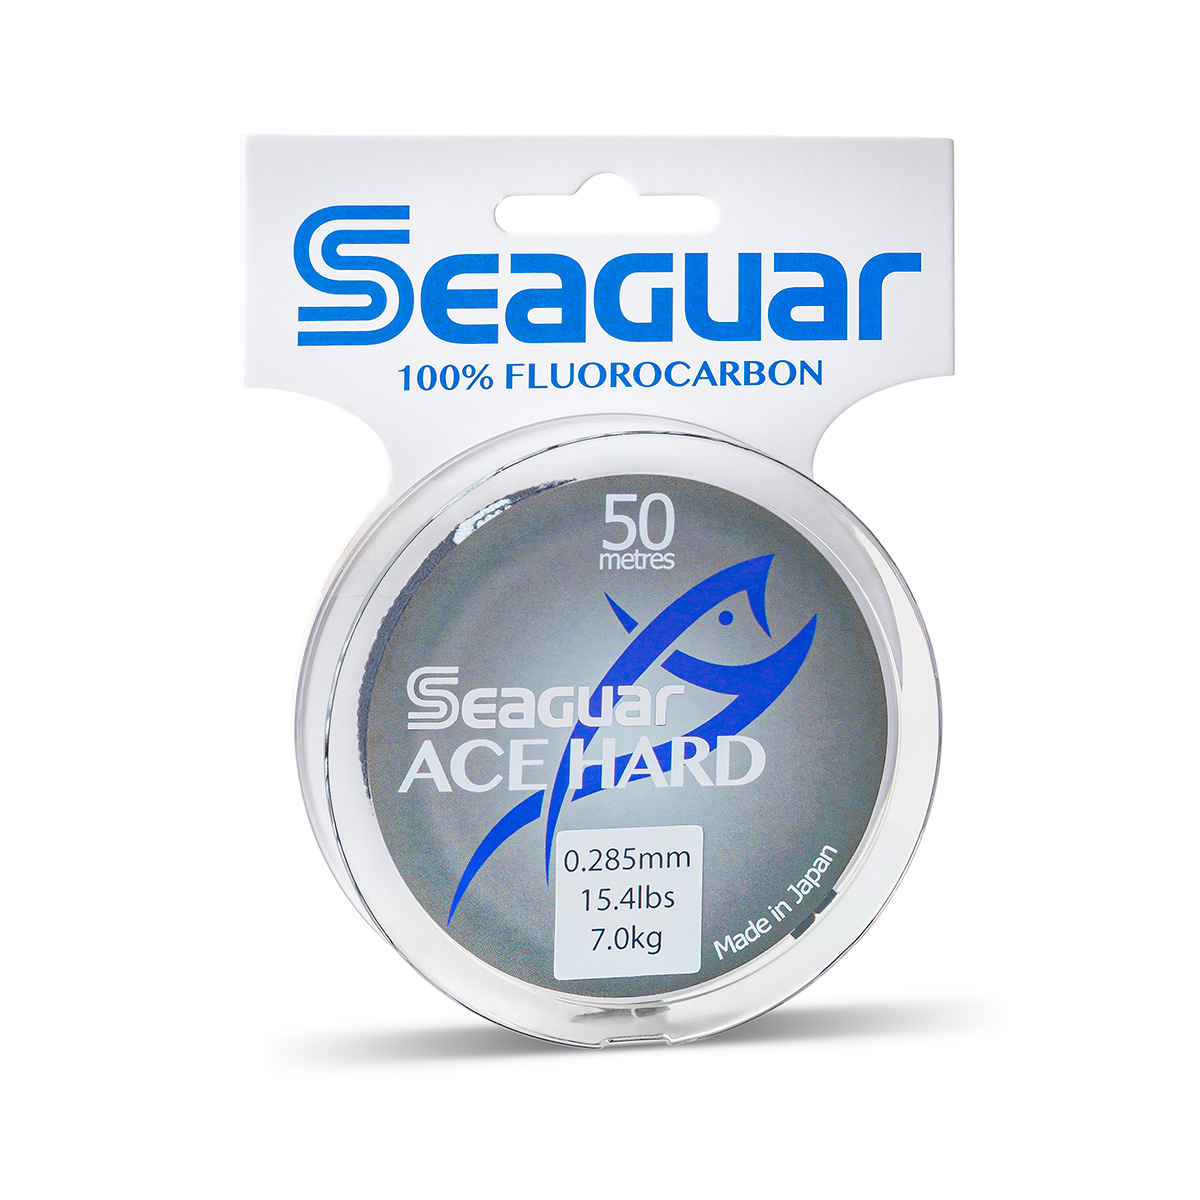 Seaguar Ace Hard Fluorocarbon Spools from